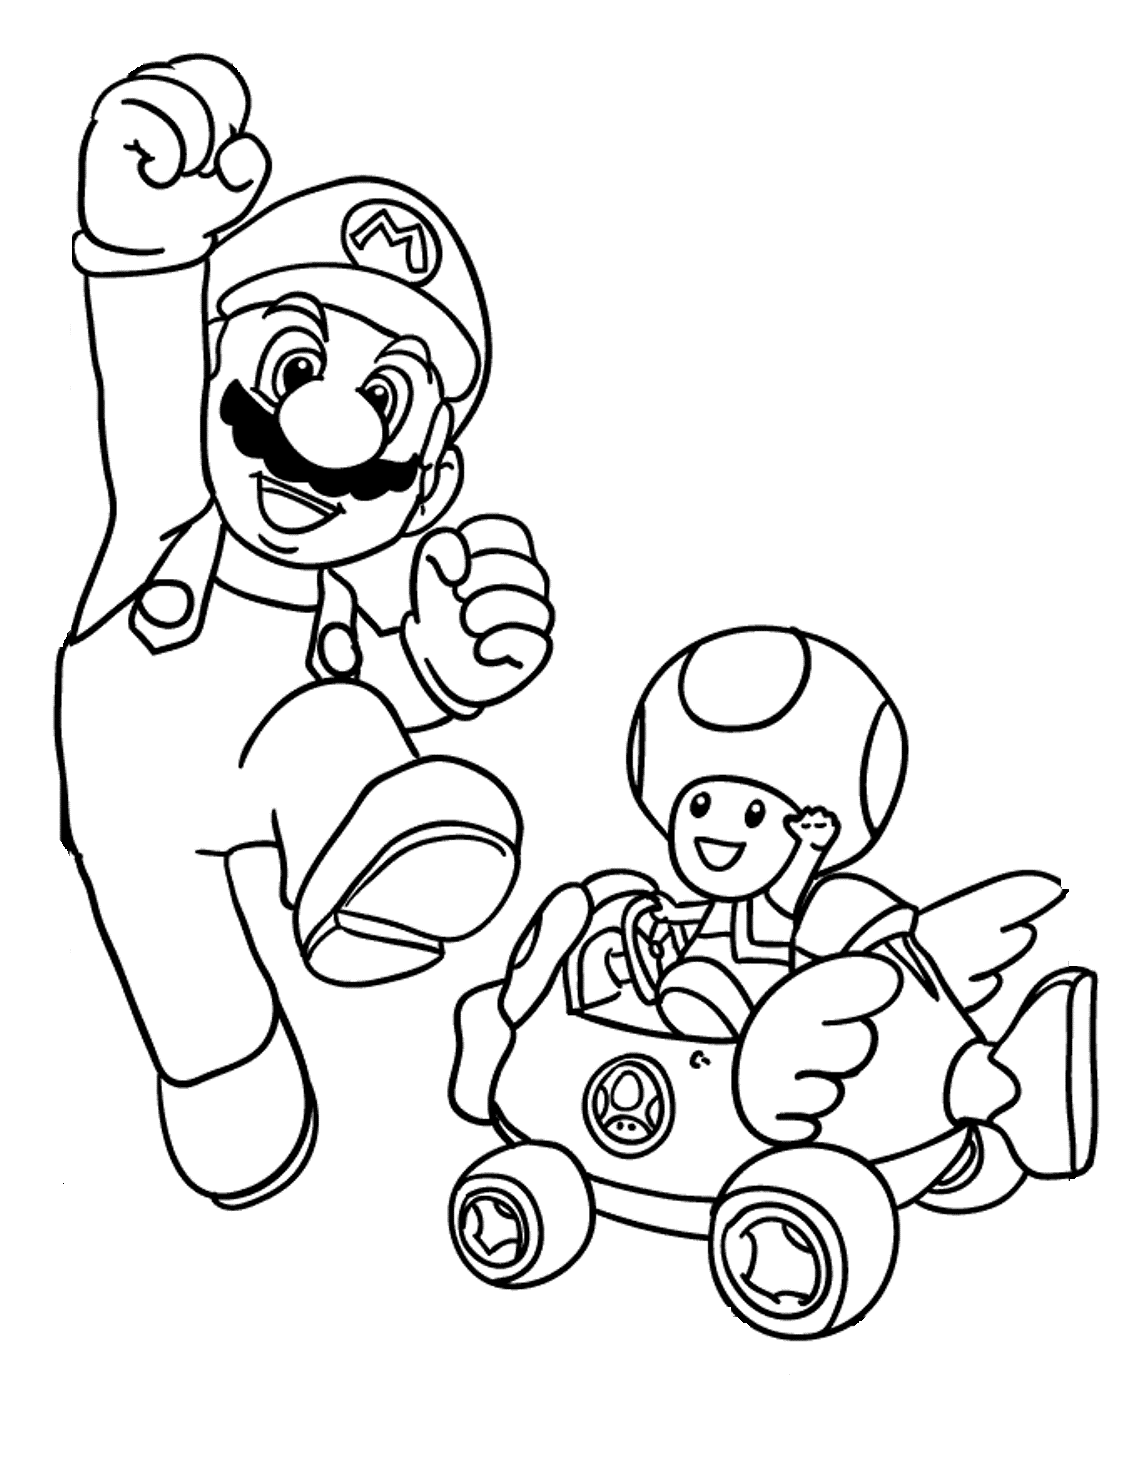 Super Mario Brothers Coloring Pages 6